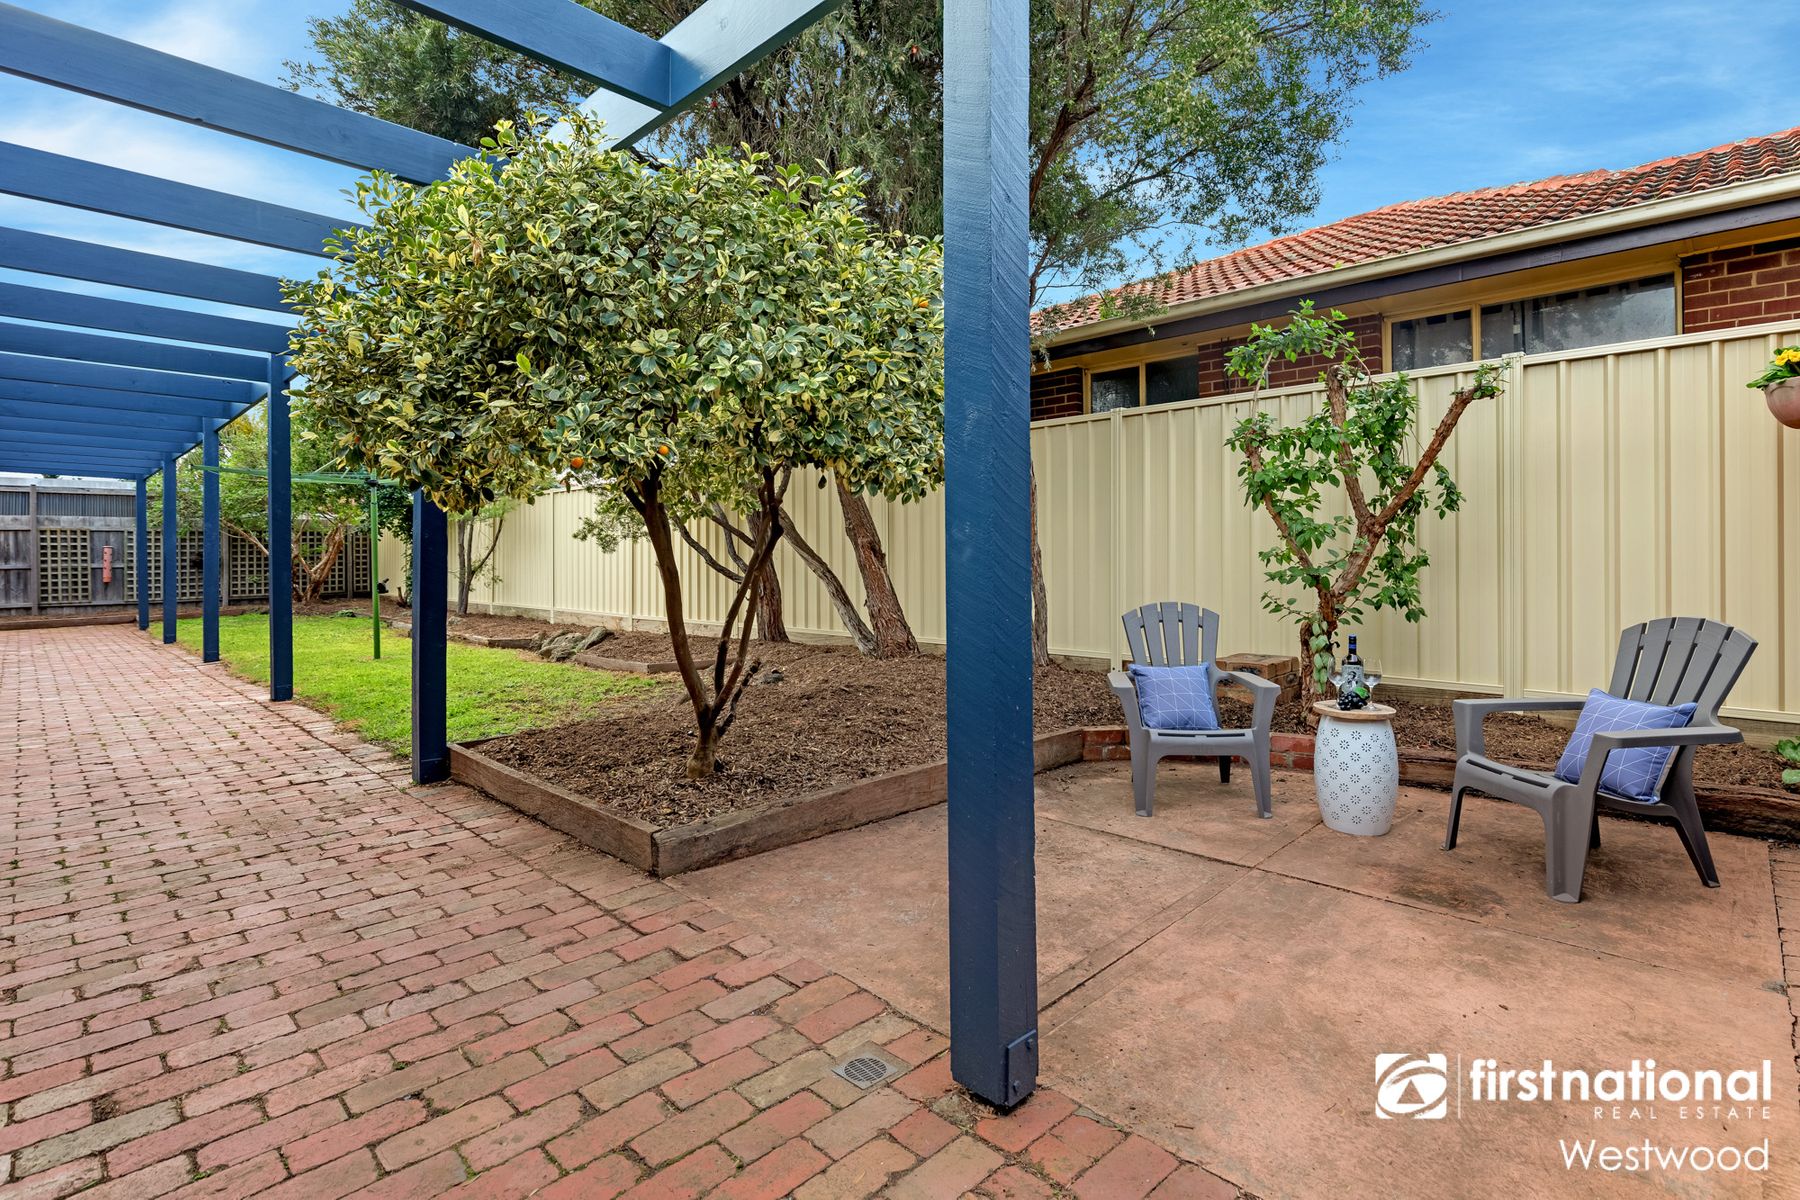 66 Woodville Park Drive, Hoppers Crossing, VIC 3029